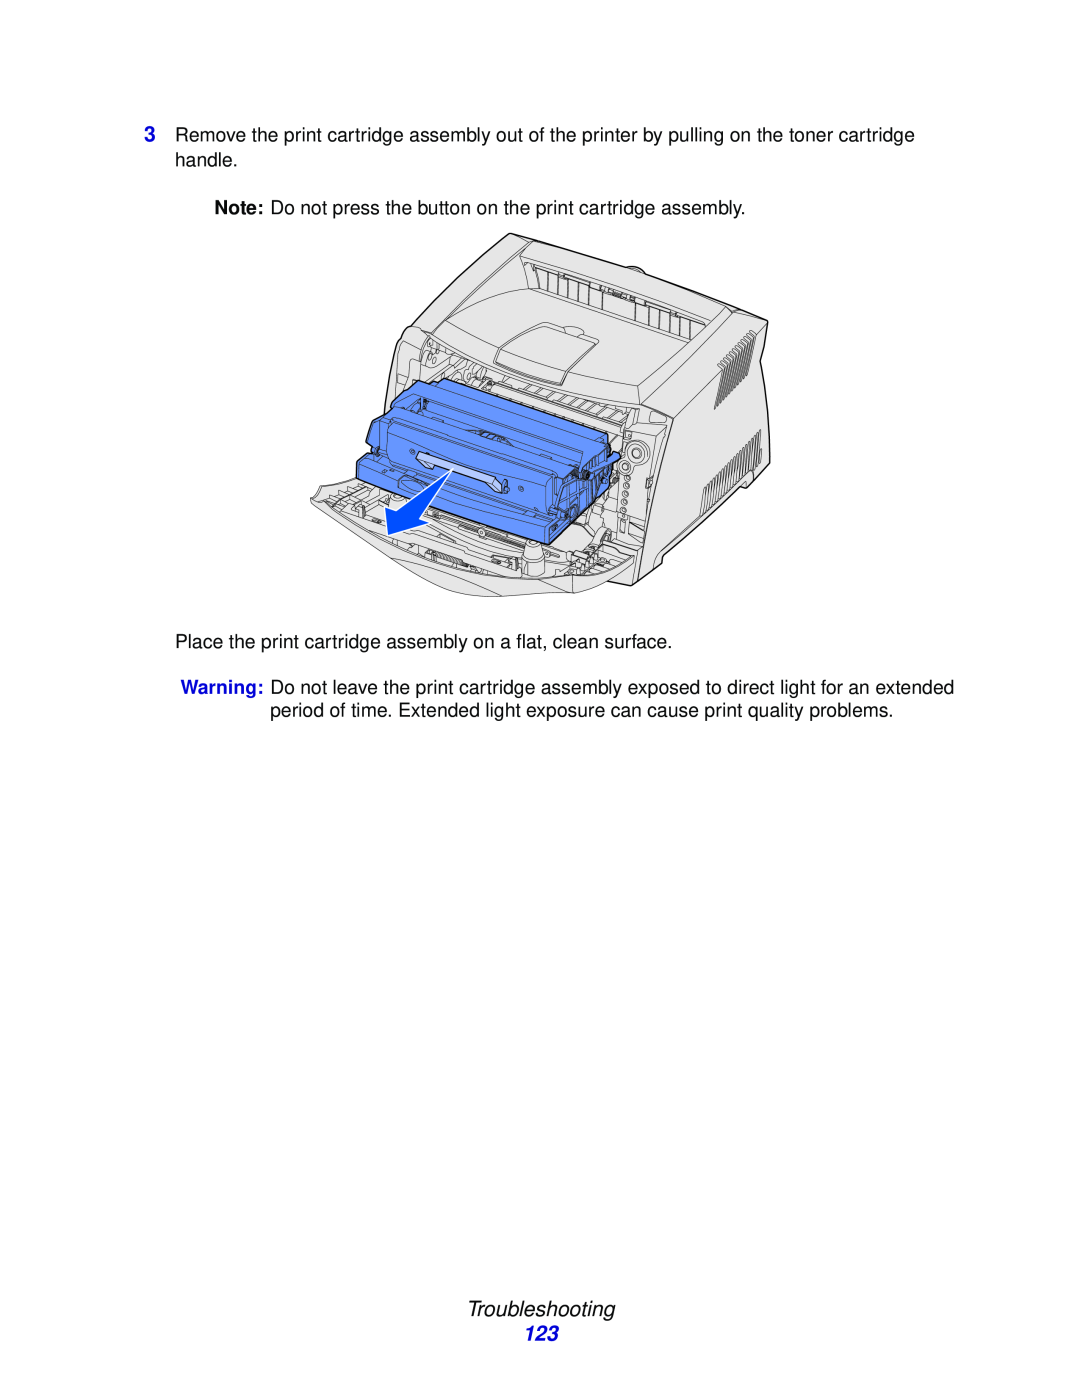 Lexmark 232, E332n, 230 manual Troubleshooting, Note Do not press the button on the print cartridge assembly 